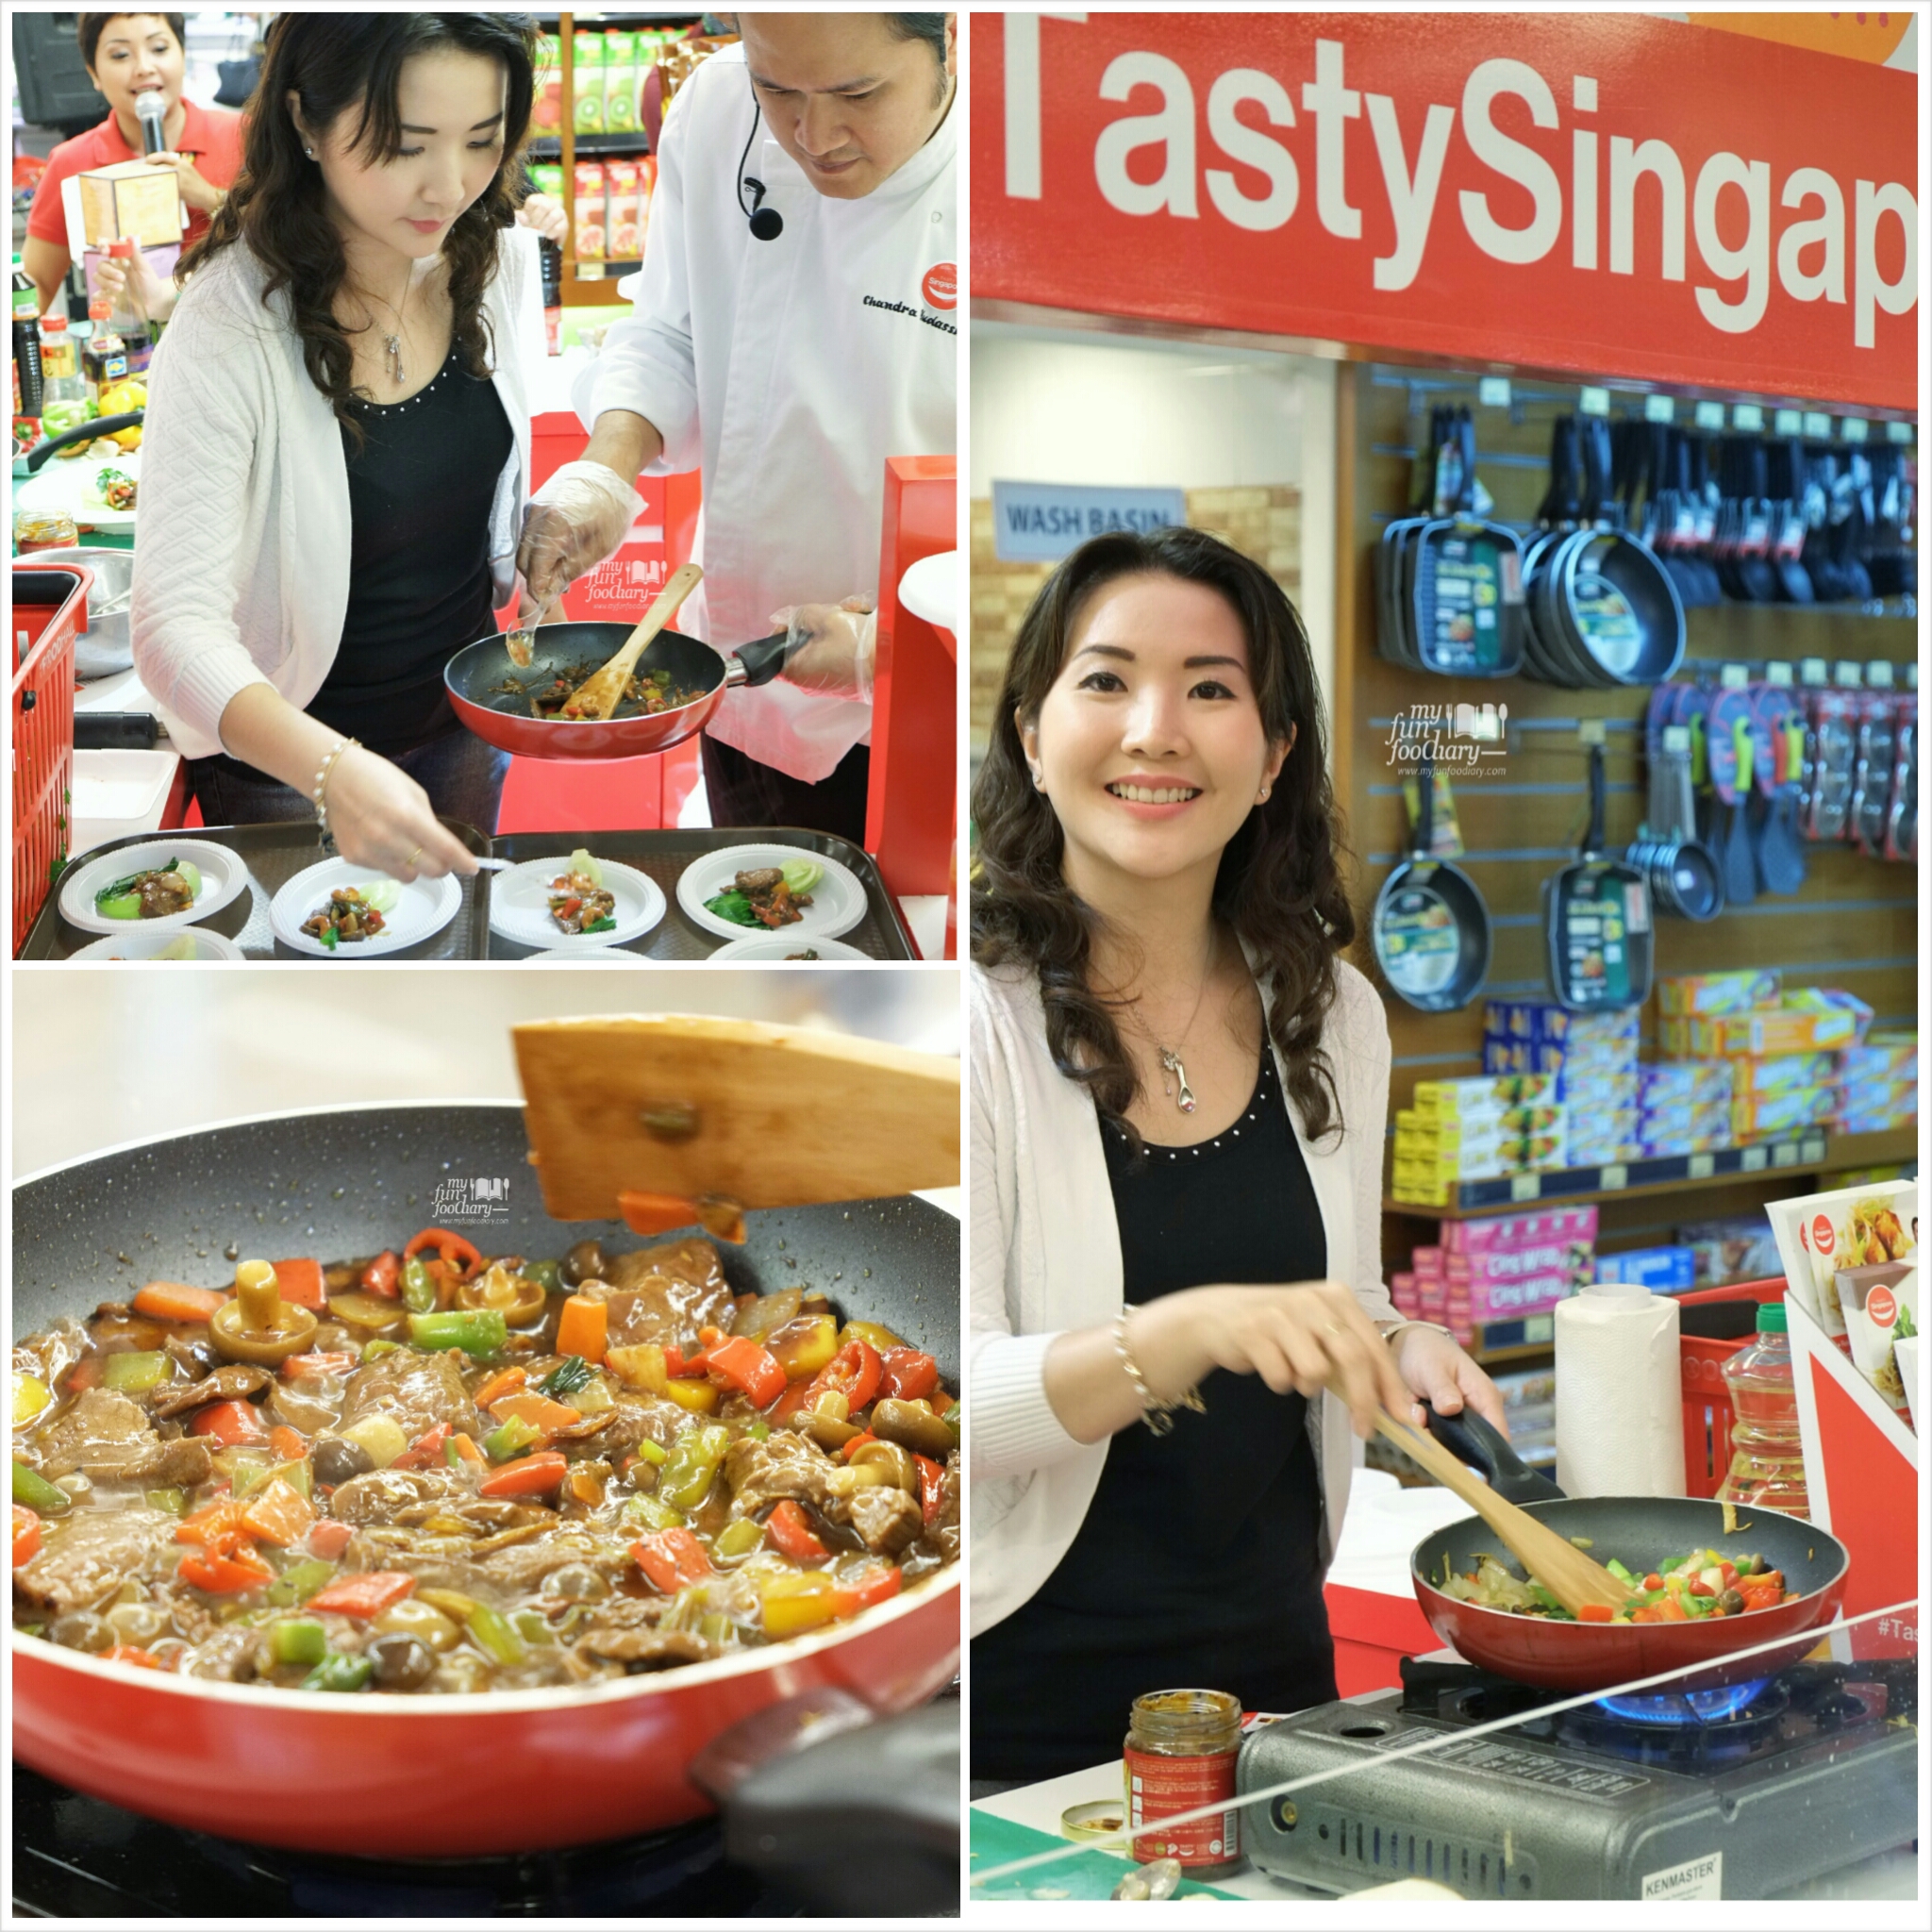 Mullie at Tasty Singapore Event by Myfunfoodiary